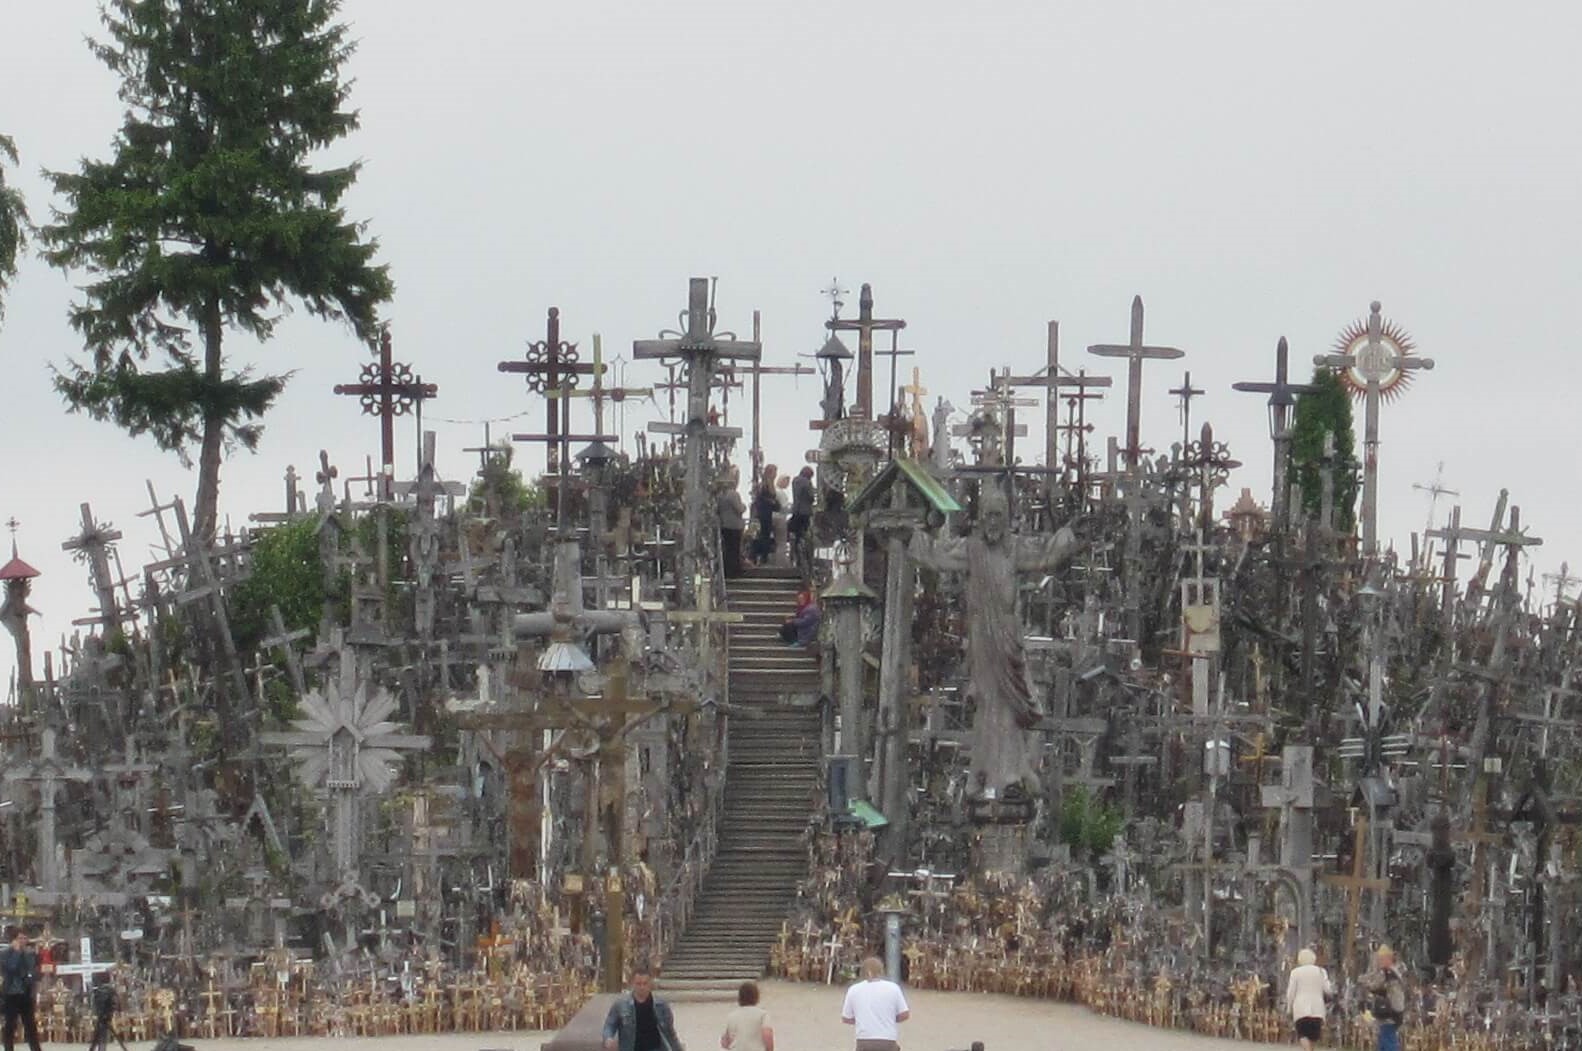 Hill of Crosses Lithuania